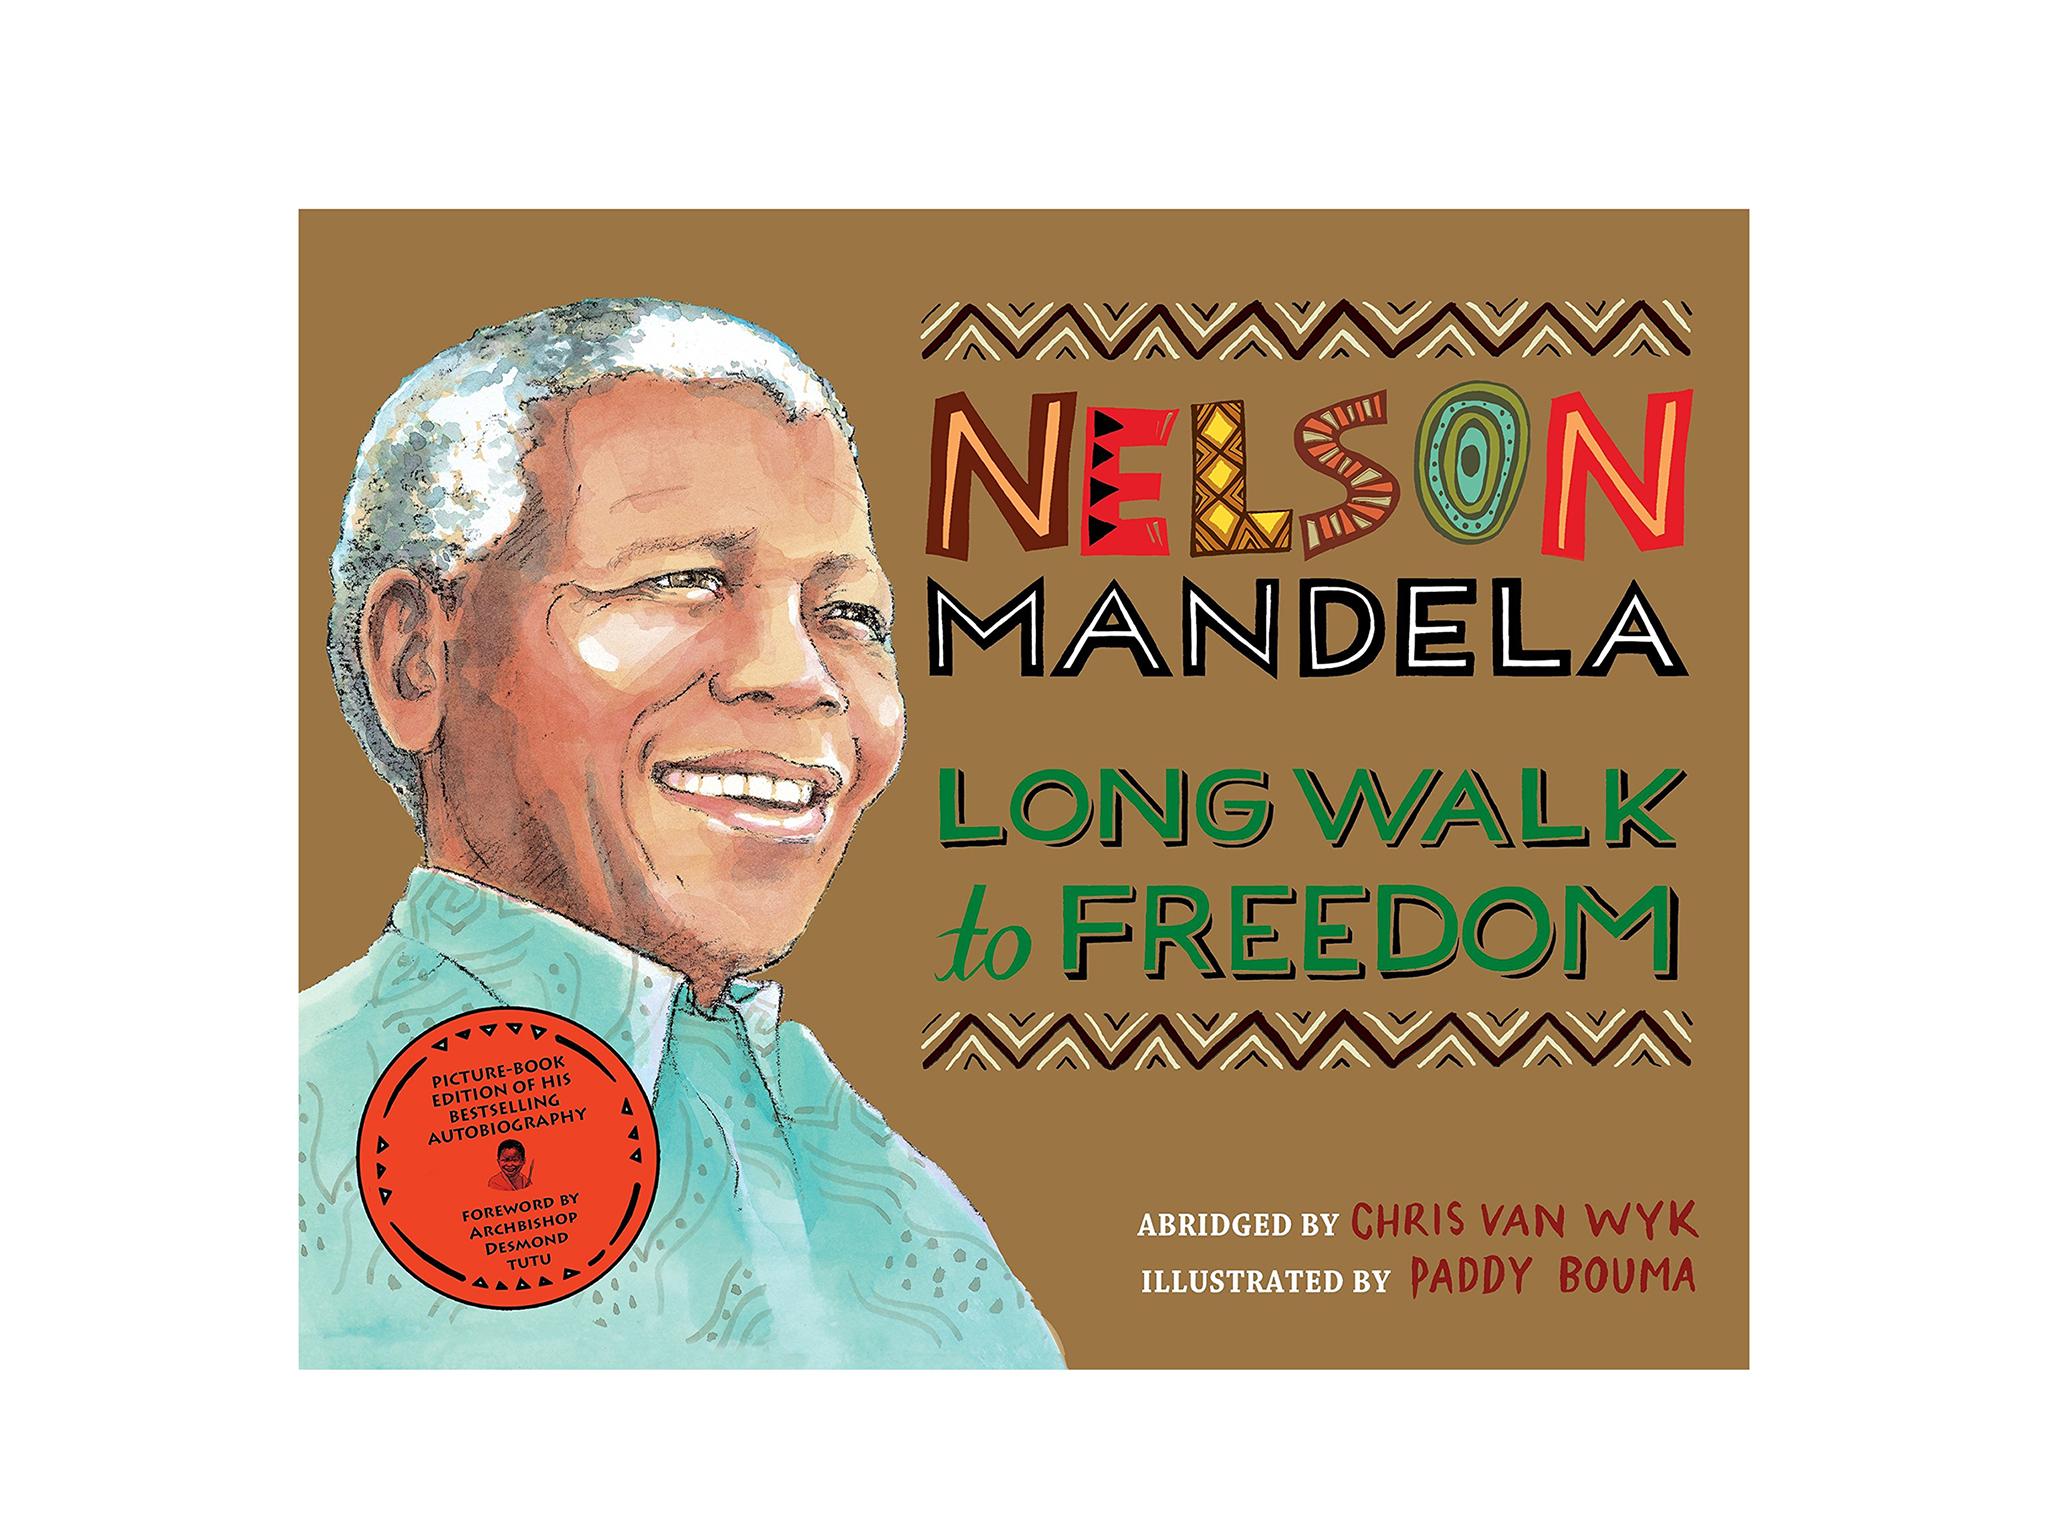 -long-walk-to-freedom-picture-book-edition-indybest.jpg